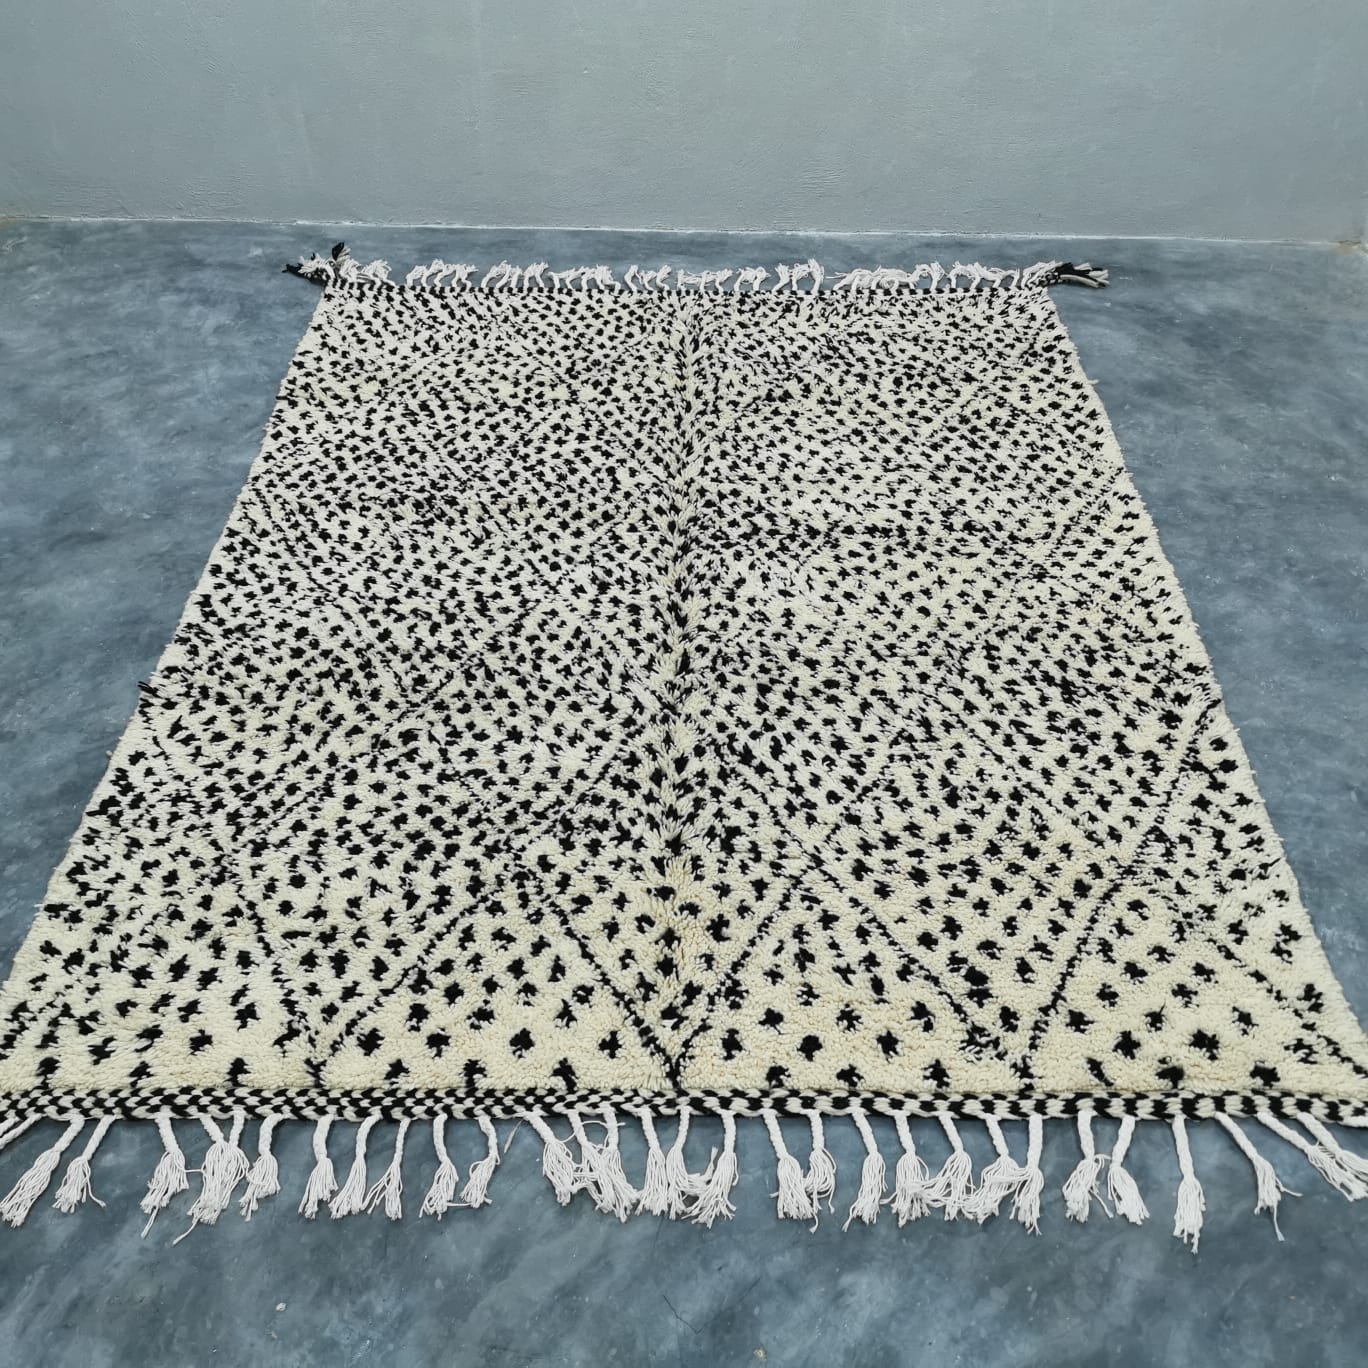 Customized Moroccan Berber Rug Unmatched Beauty